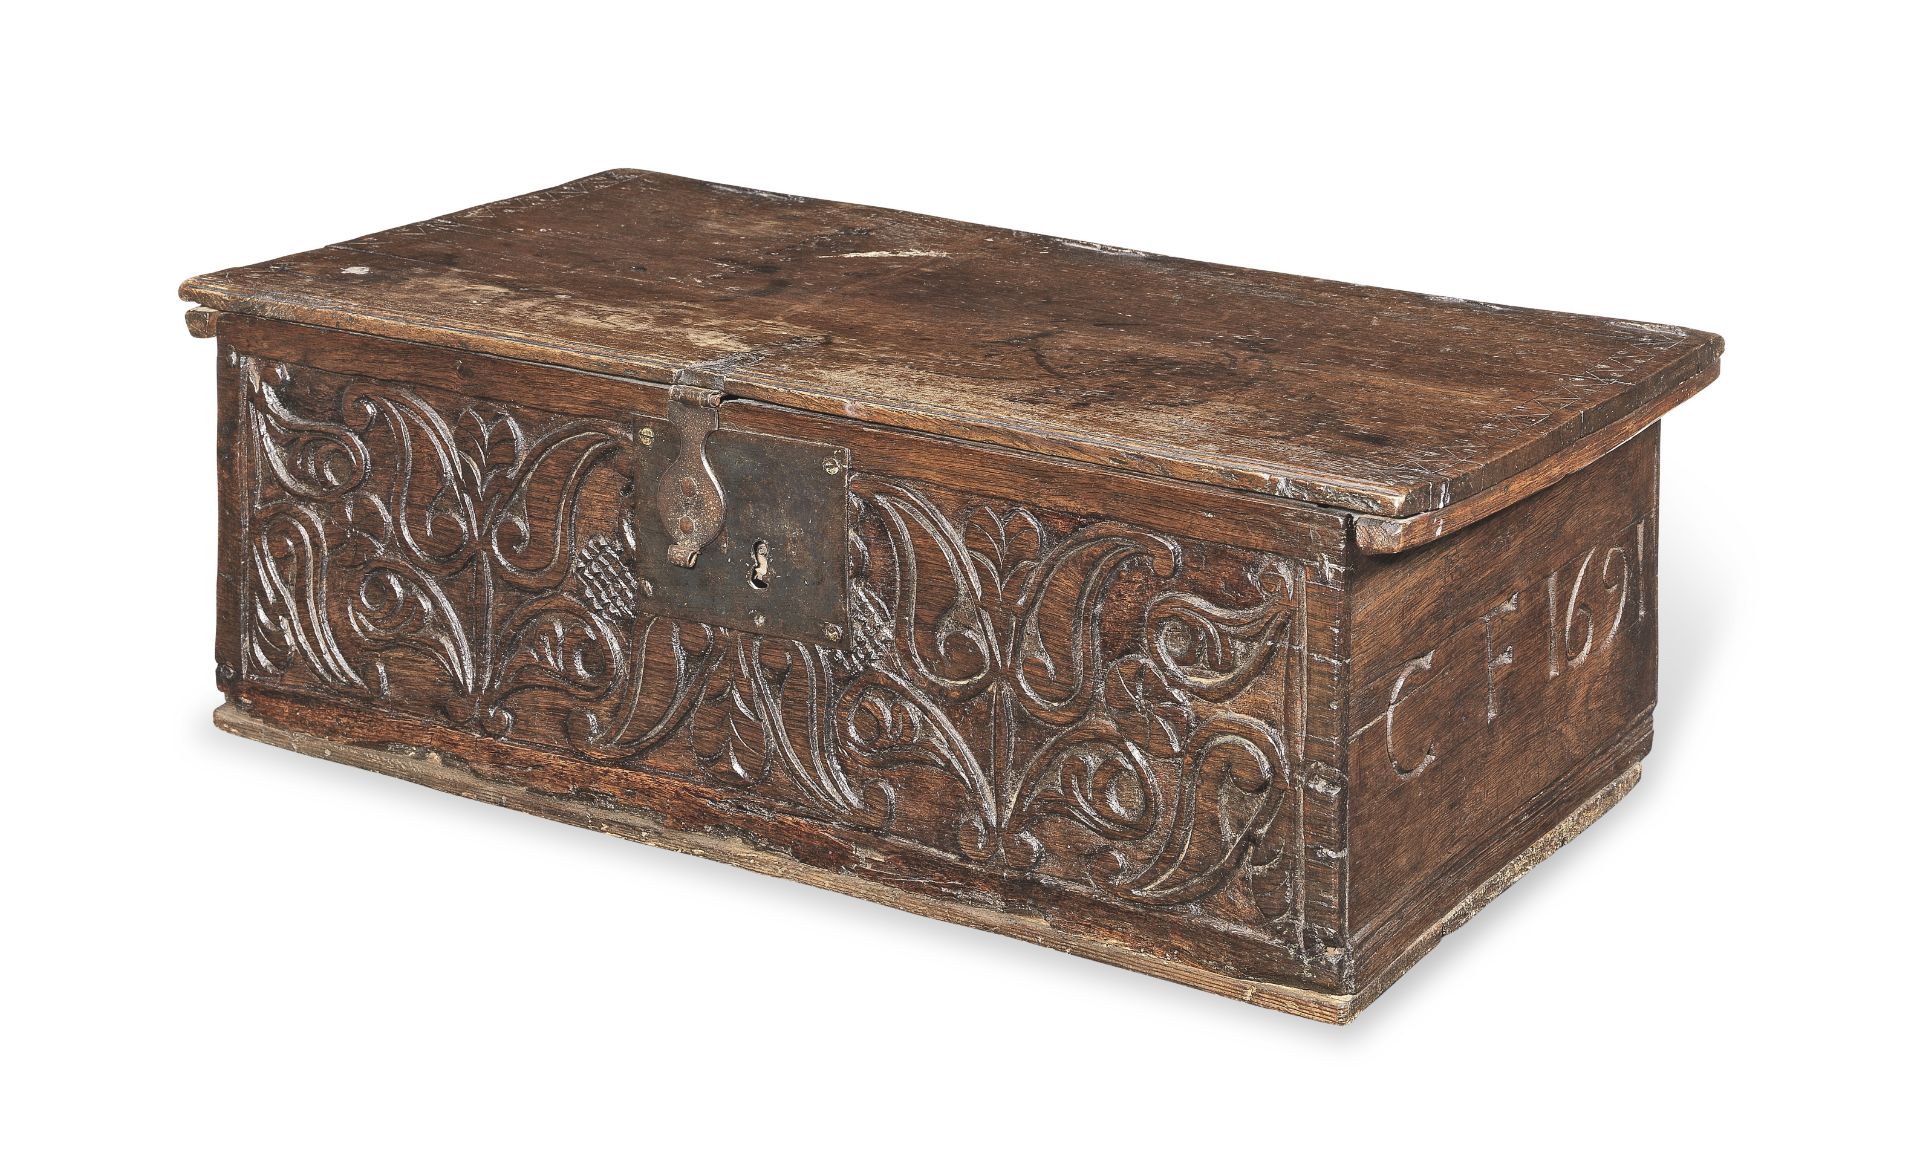 A William & Mary boarded oak box, North Country, dated 1691